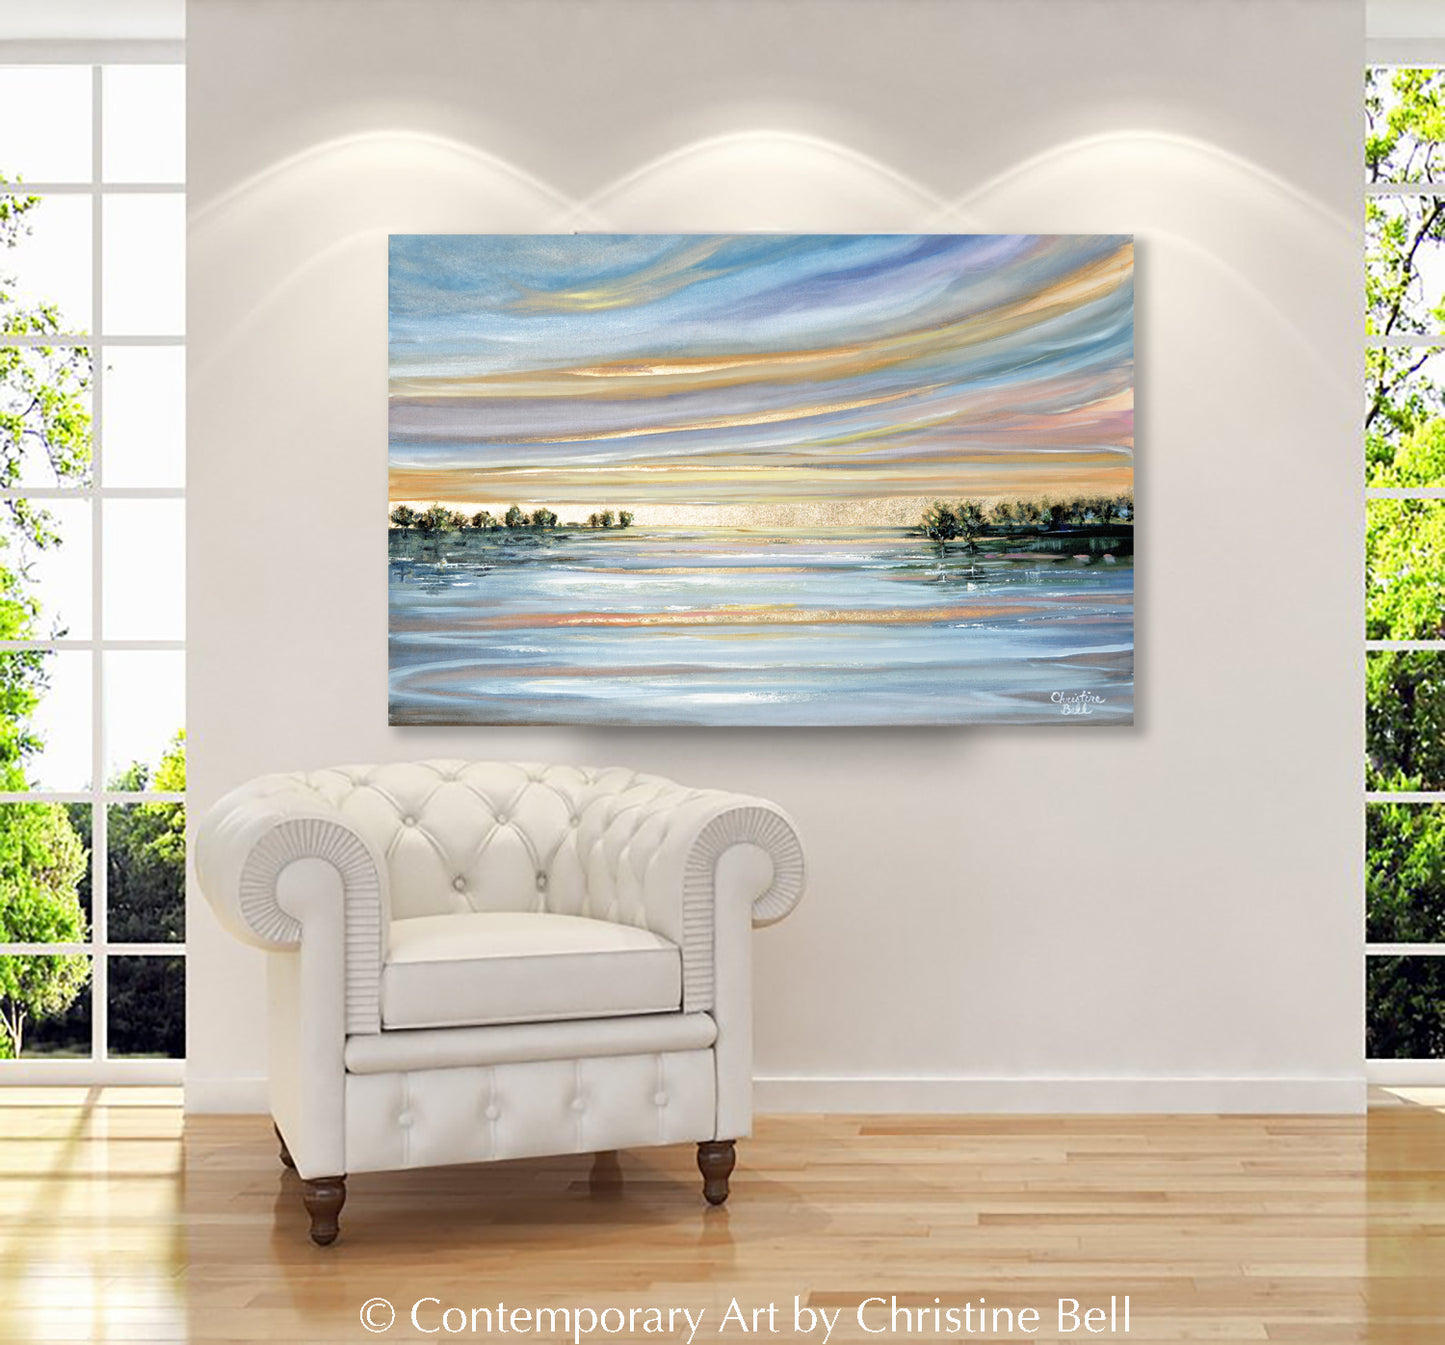 "A Moment of Bliss" ORIGINAL Coastal Seascape Painting with Gold Leaf, 36x24"